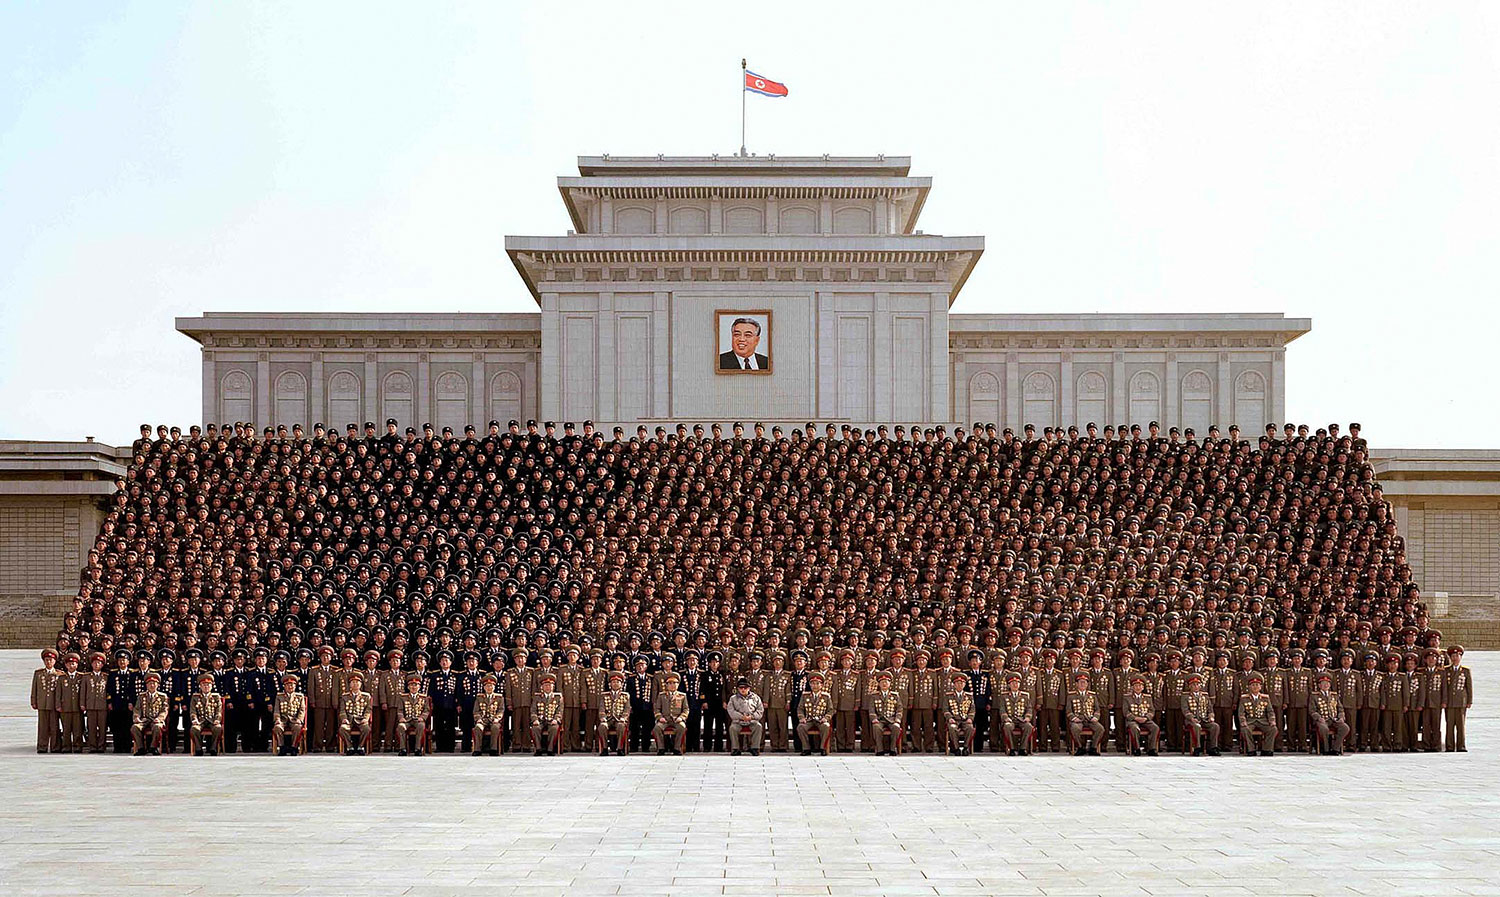 This undated photo, released by North Korea's official Korean Central News Agency (KCNA) on Mar. 20, 2009, shows Kim Jong Il (front row, center) posing at a meeting of active outpost soldiers at the plaza of the Kumsusan Memorial Palace in Pyongyang.